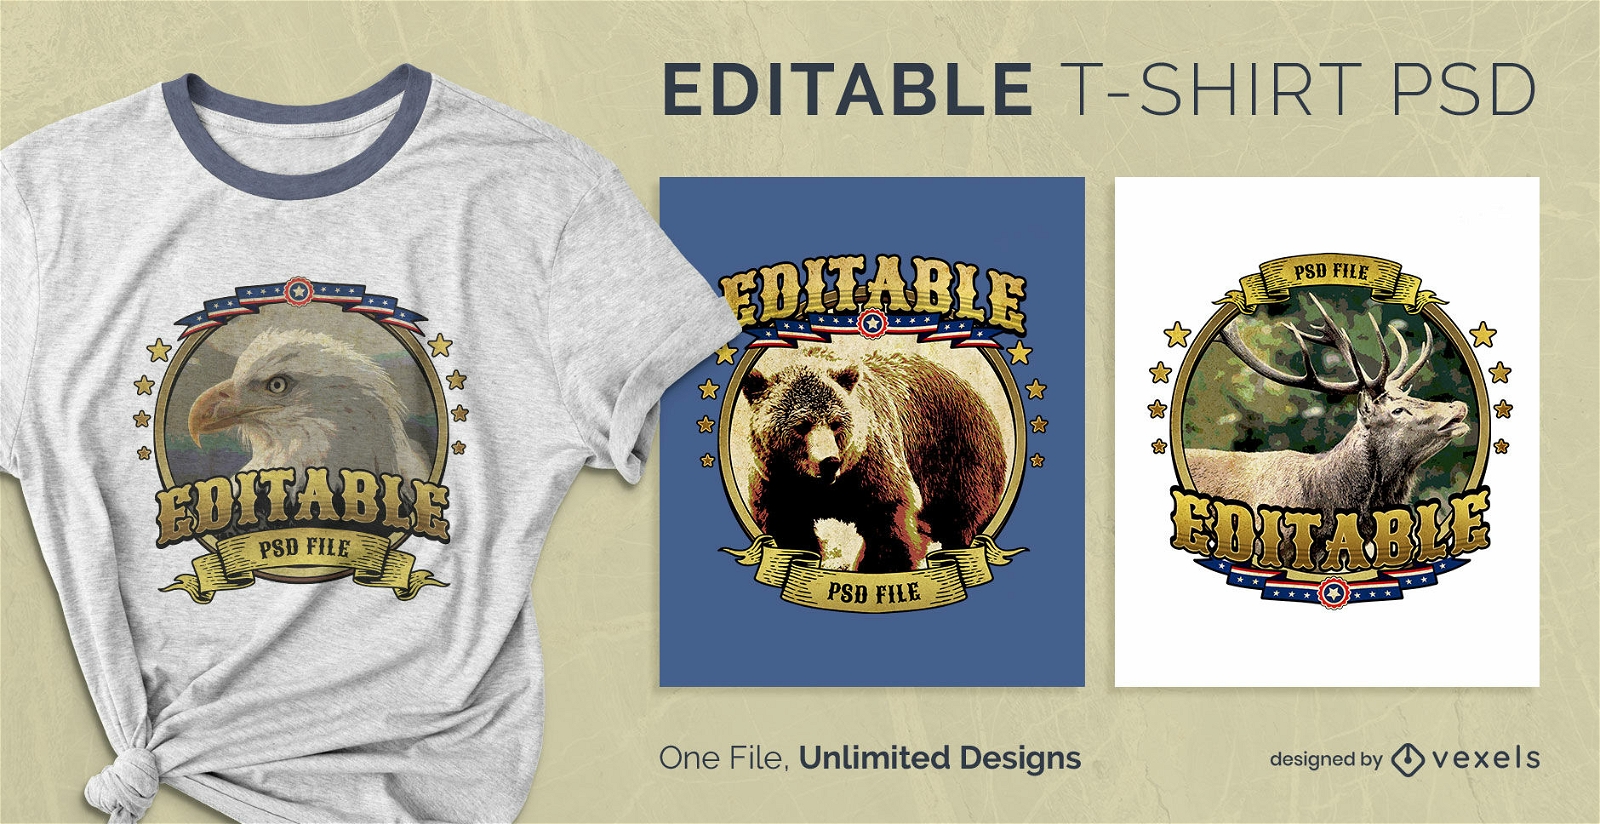 American wild animals scalable t-shirt psd